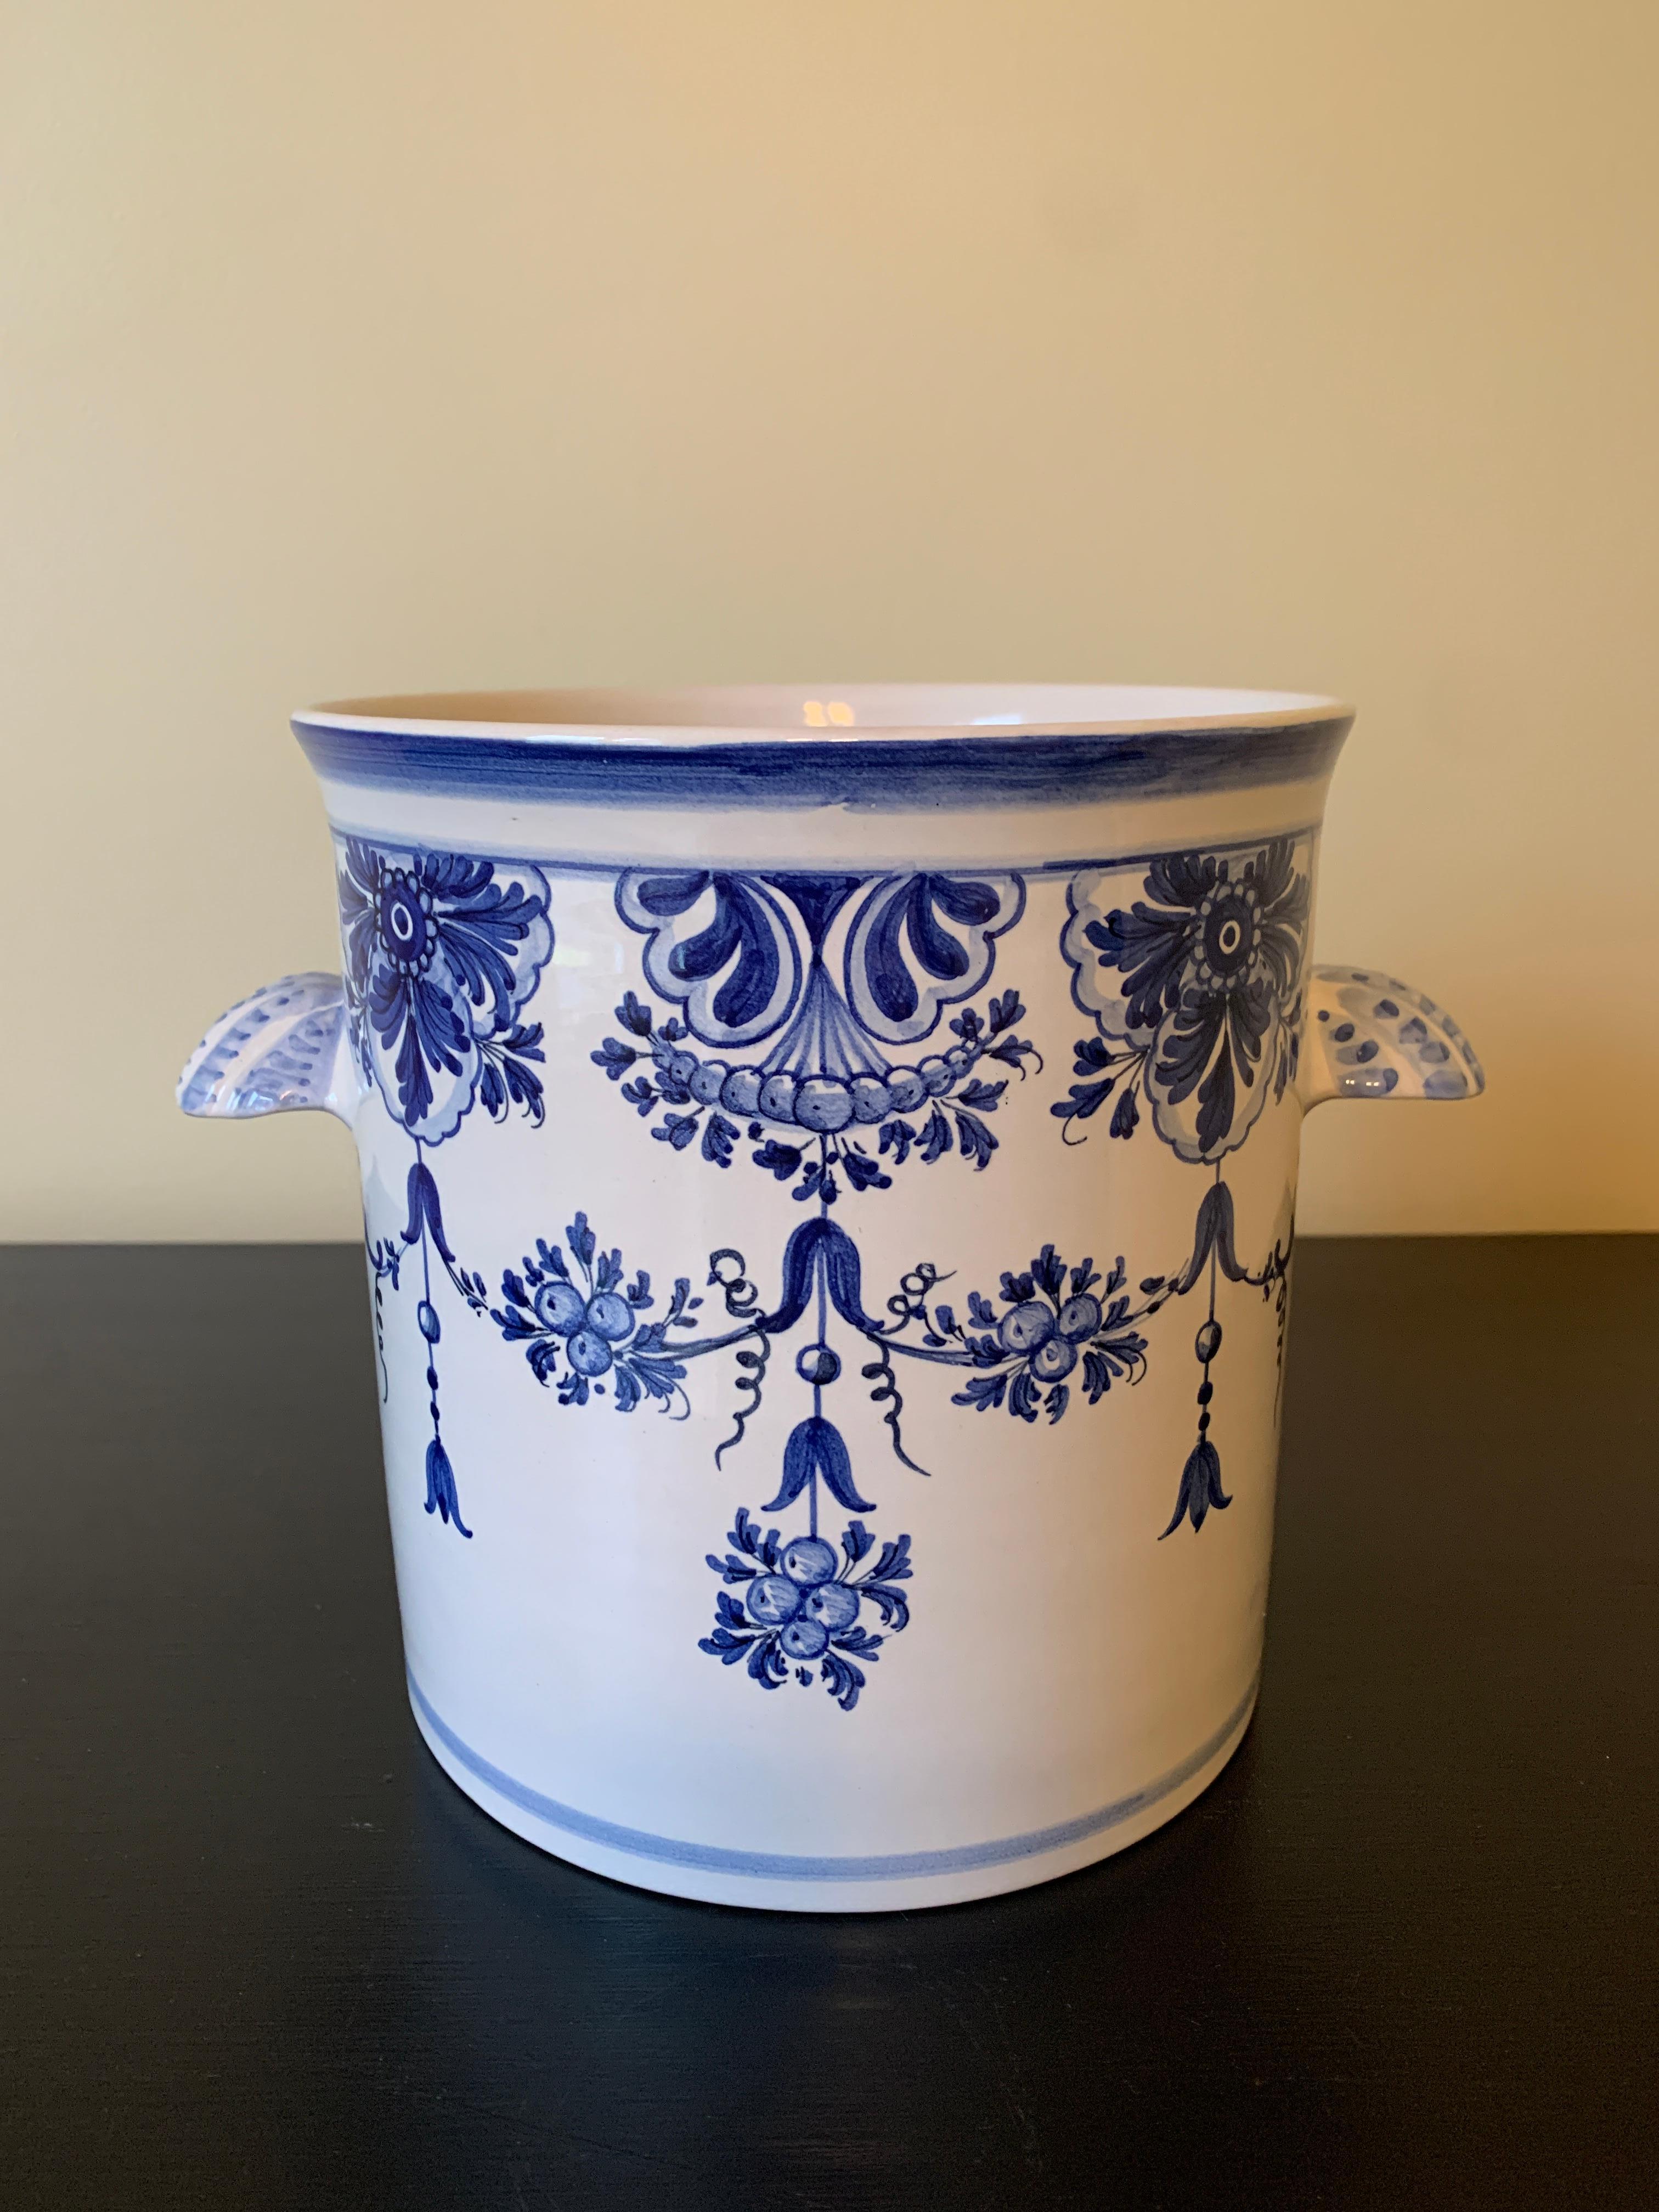 A beautiful neoclassical style hand-painted blue and white porcelain ice bucket

Italy, Late-20th Century

Measures: 9.5ʺW × 7ʺD × 7.25ʺH.

Very good vintage condition.